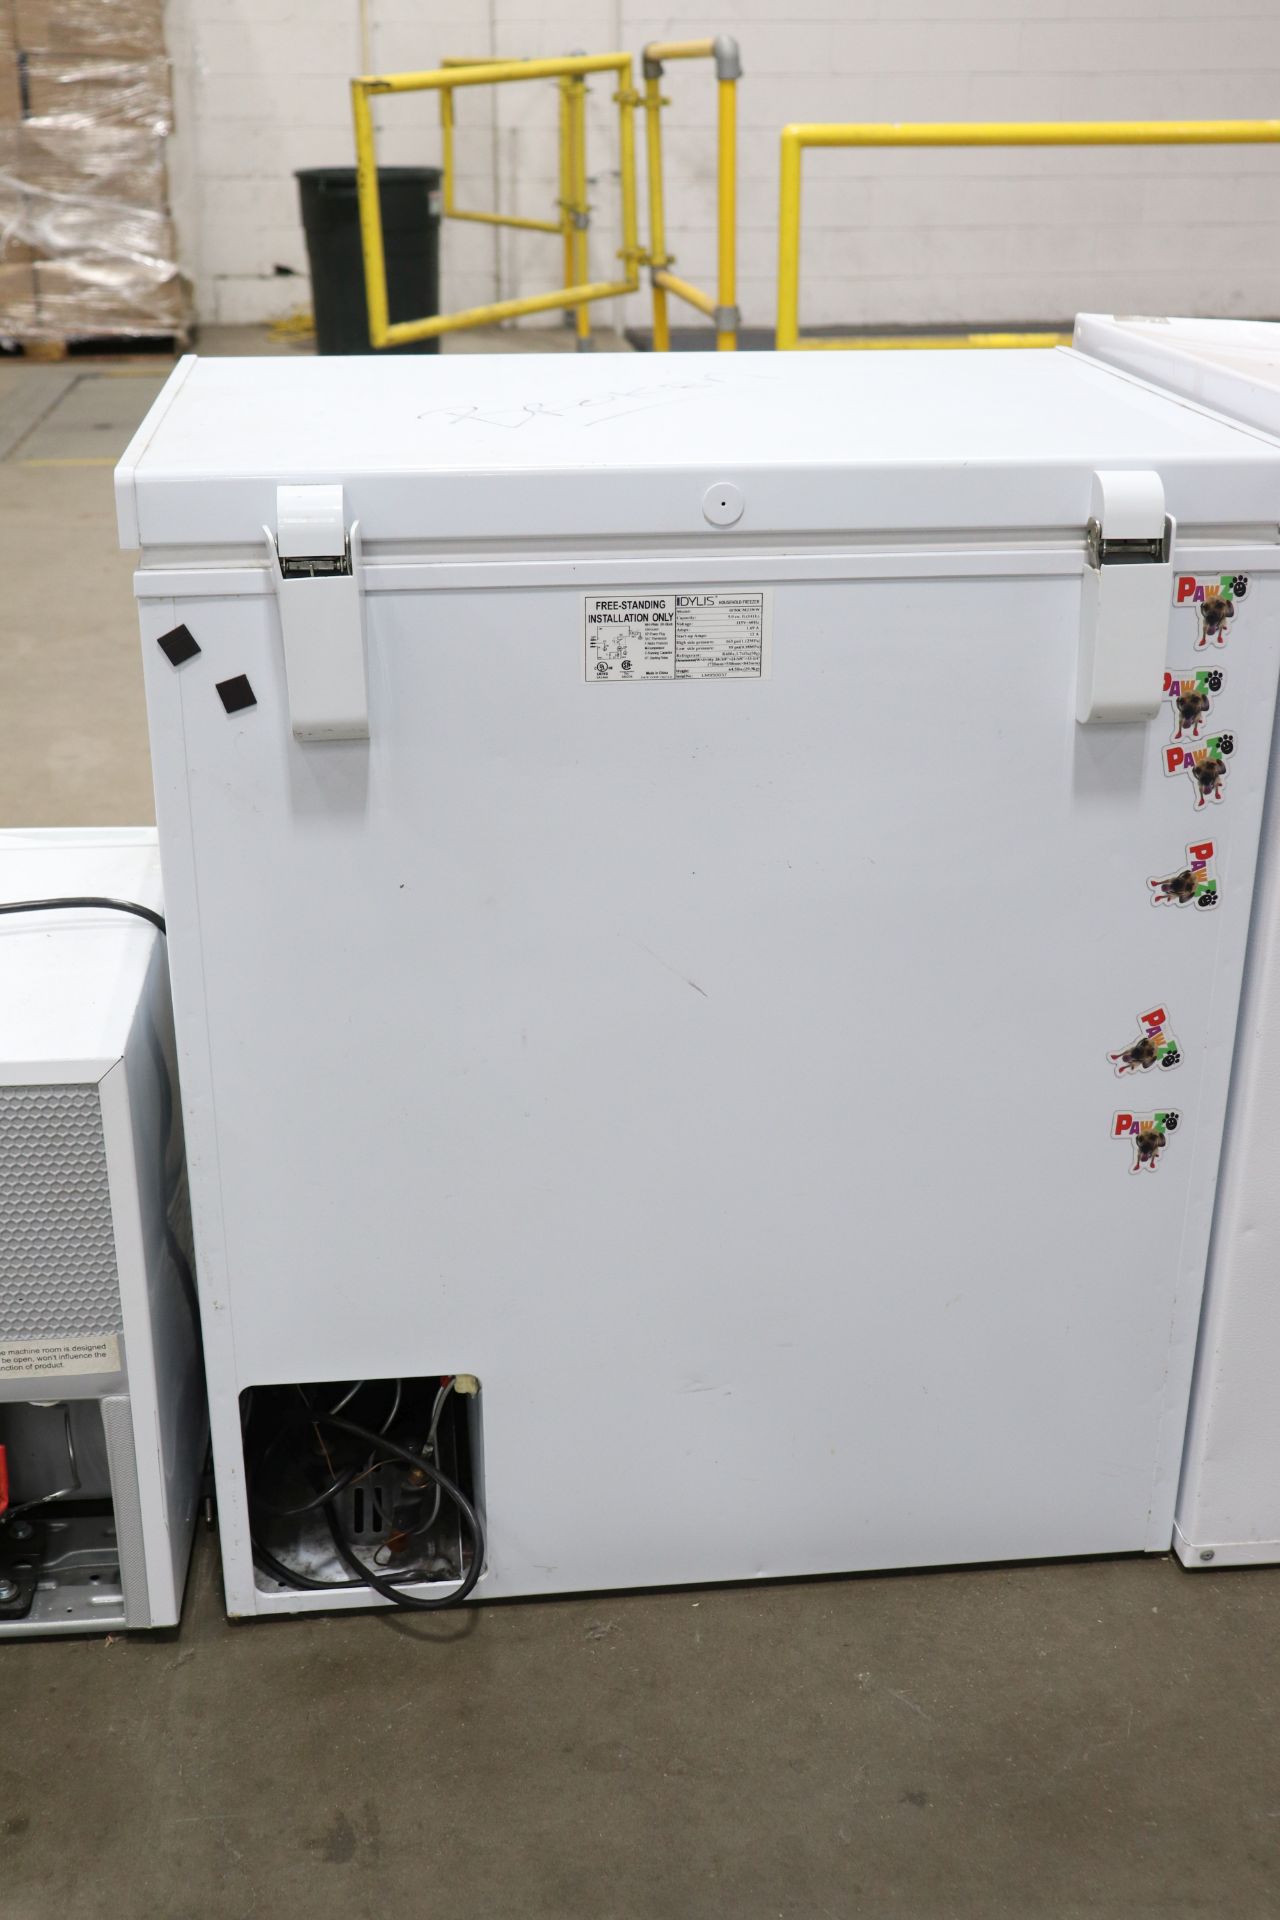 Idylis Chest Freezer, 5 cubit foot capacity, Model IF50CM23NW, Serial LM950037, 39" x 22" x 33" - Image 4 of 6